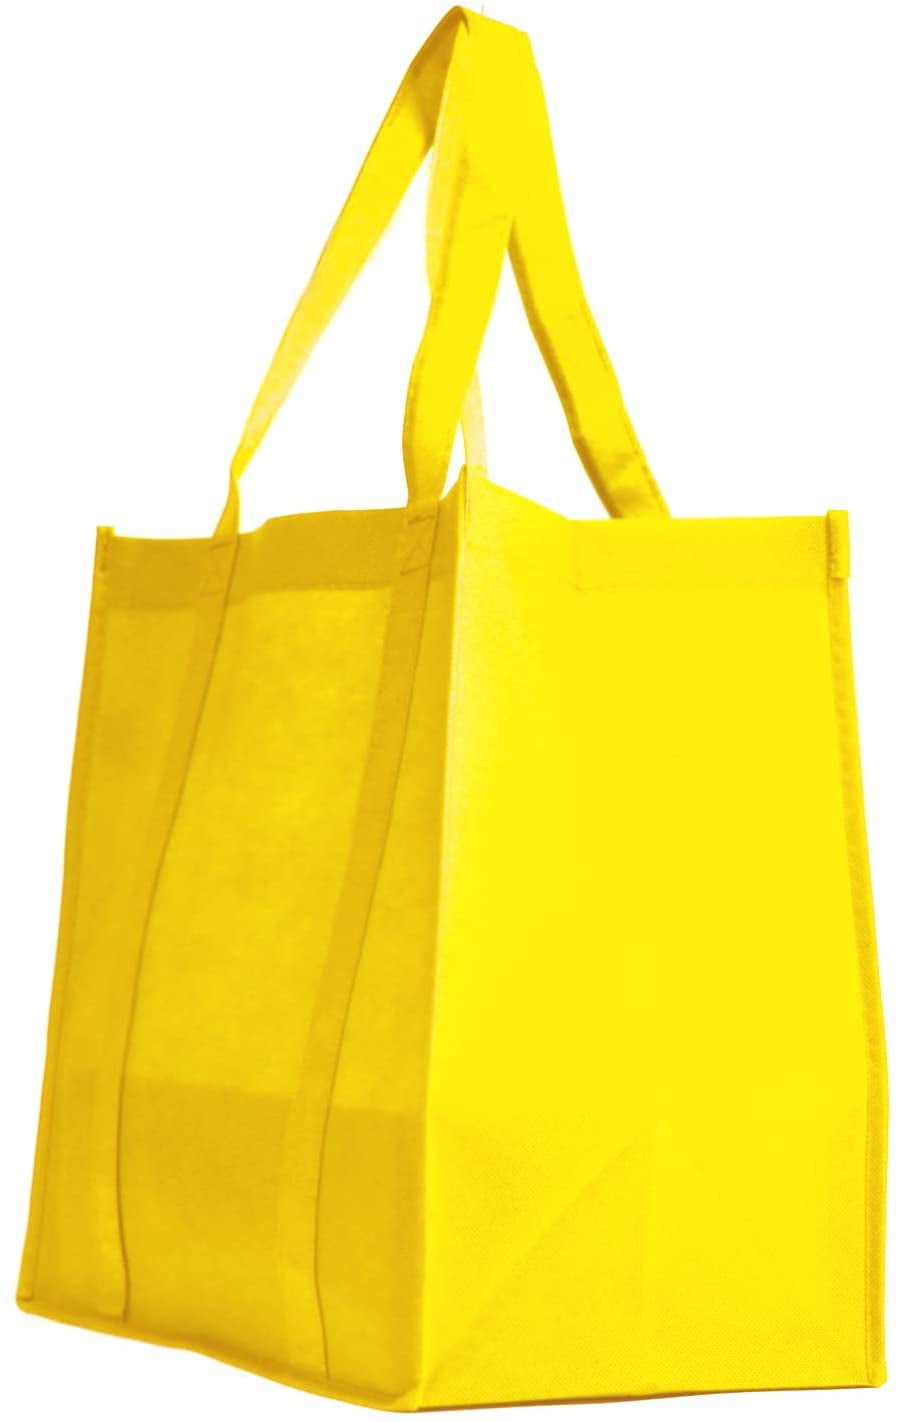 Tote Shopping Bags Heavy duty Reusable Grocery Shopping Bag Thank You Bag Style 